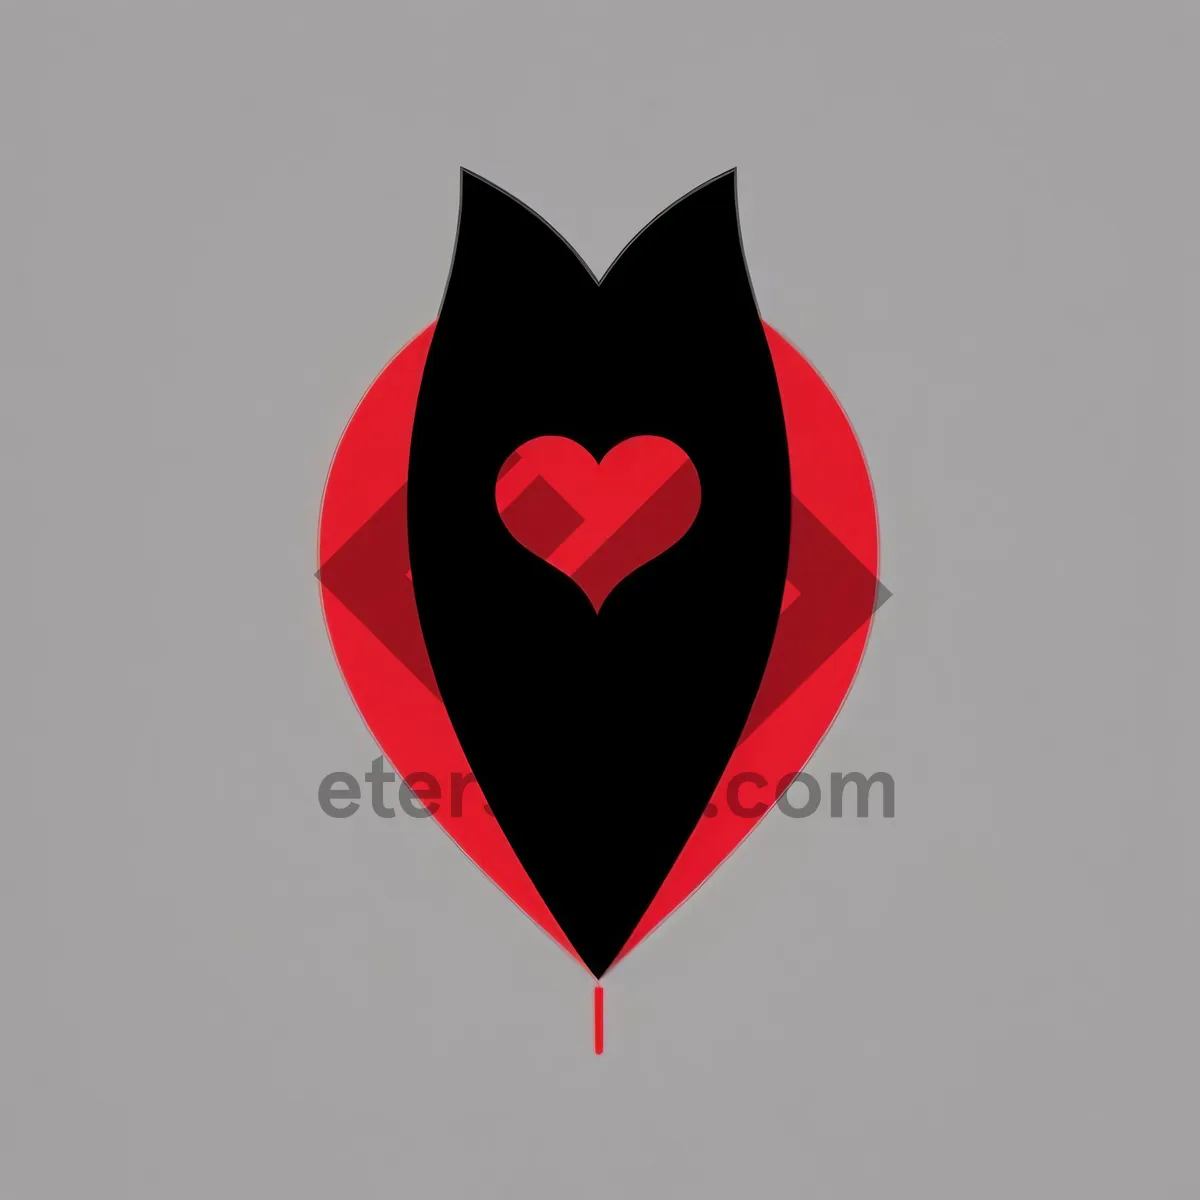 Picture of Love's Emblem: Heart-shaped Valentine Icon for Graphic Design